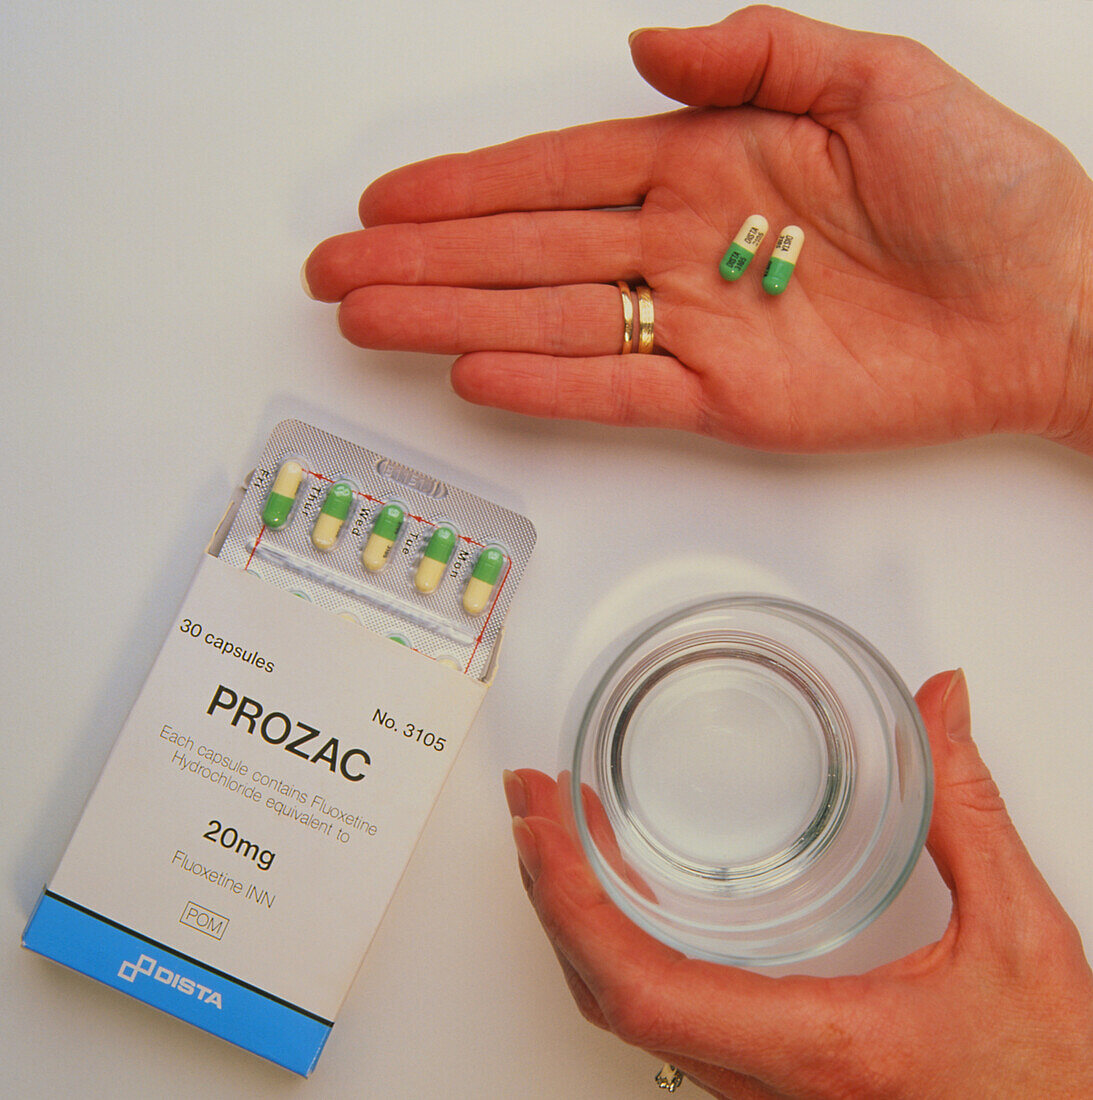 Prozac pack with pills in hand and glass of water